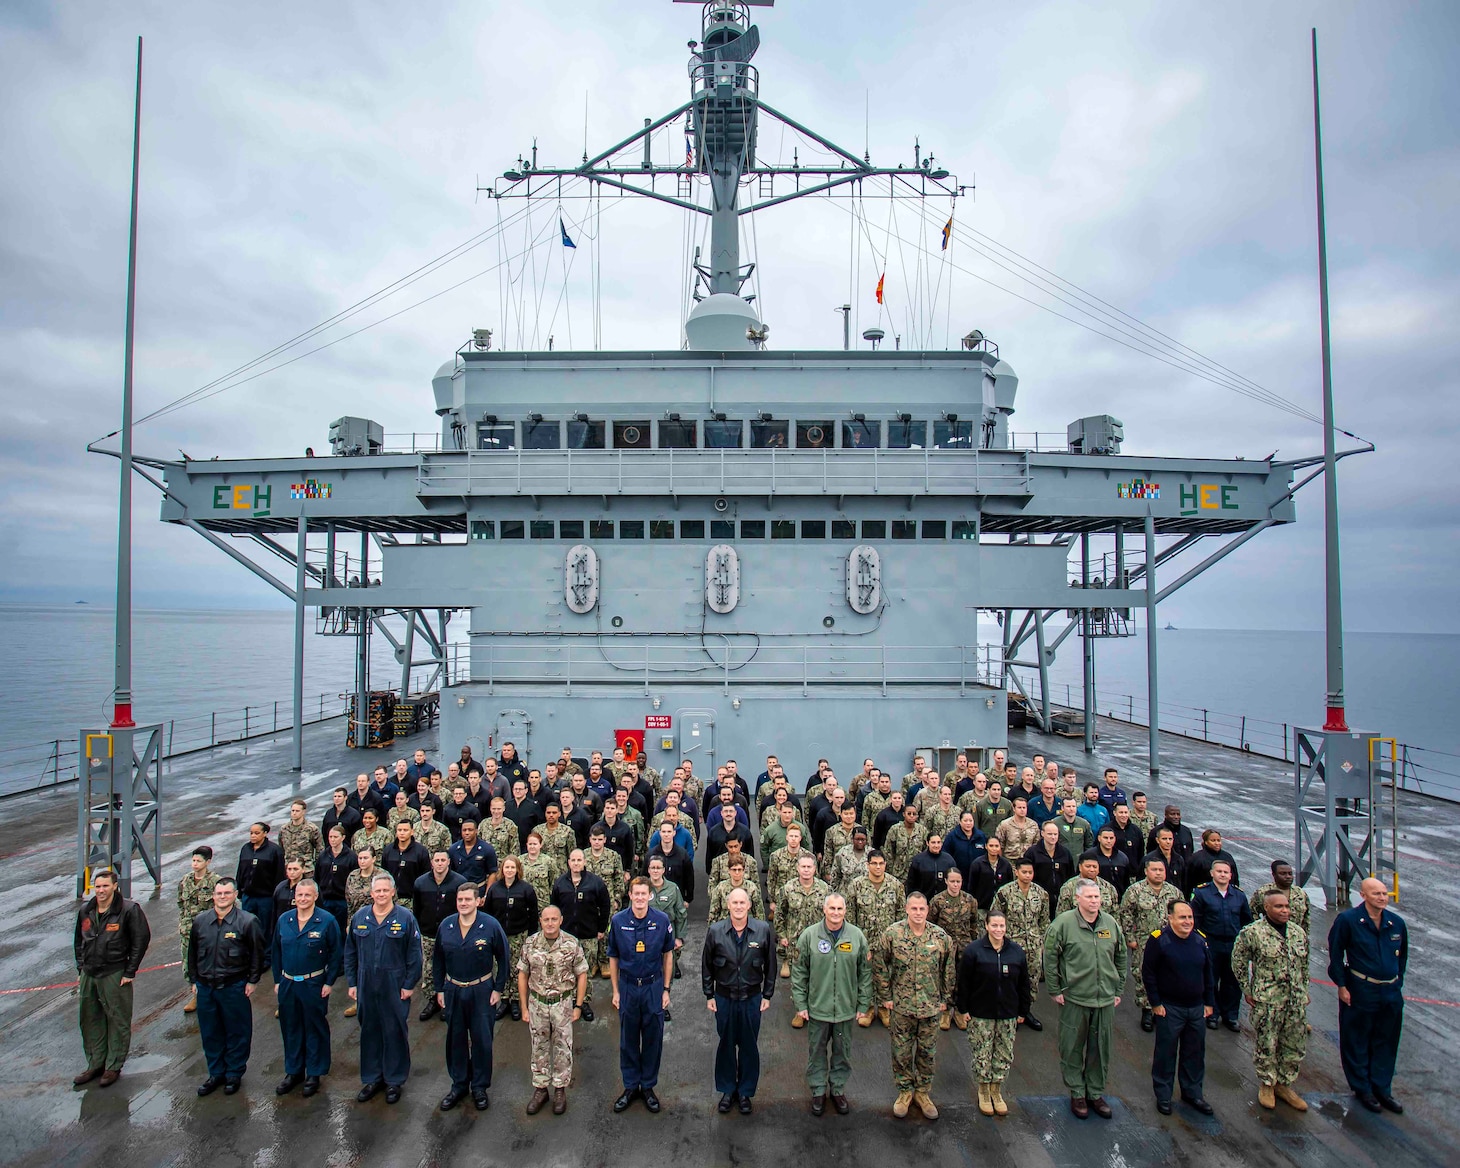 Members of U.S. Sixth Fleet (SIXTHFLT) and Naval Striking and Support Forces NATO (STRIKFORNATO), commanded by Vice Adm. Gene Black, center, pose for a photo aboard the SIXTHFLT flagship, the Blue Ridge-class command and control ship USS Mount Whitney (LCC 20).